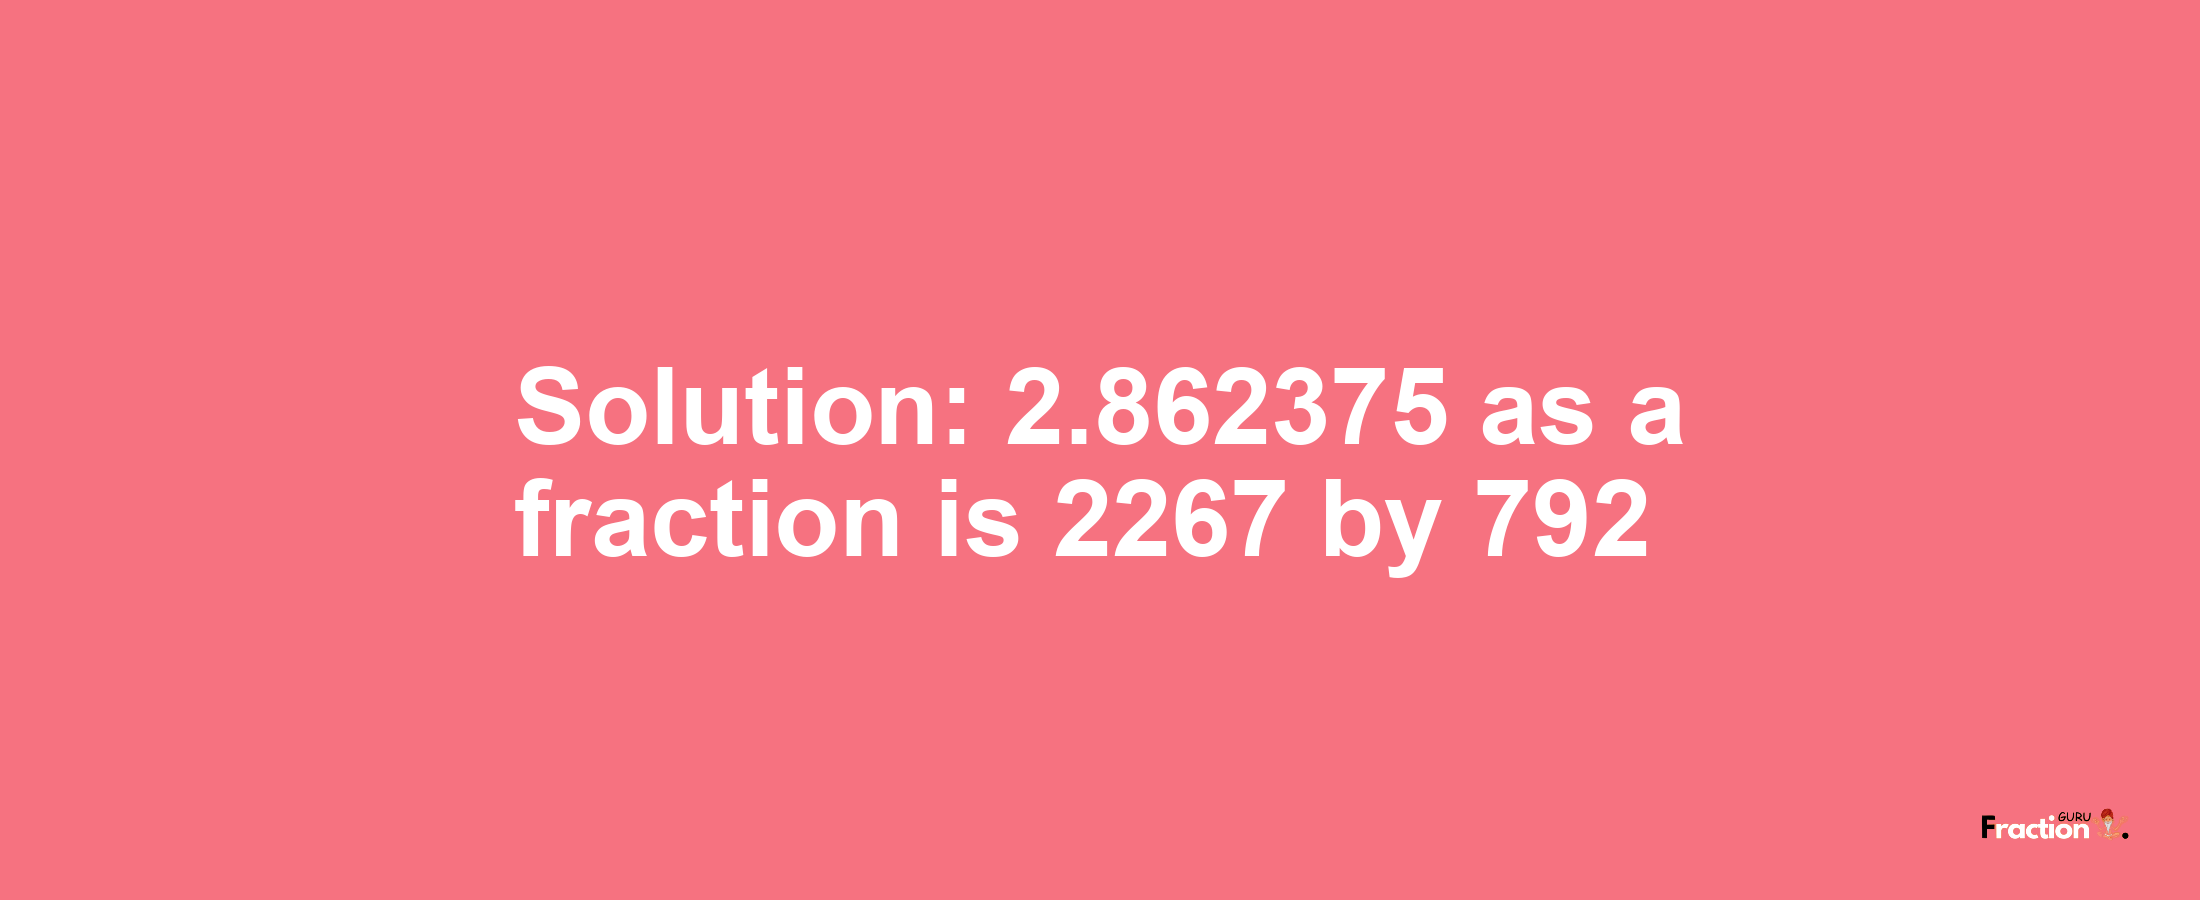 Solution:2.862375 as a fraction is 2267/792